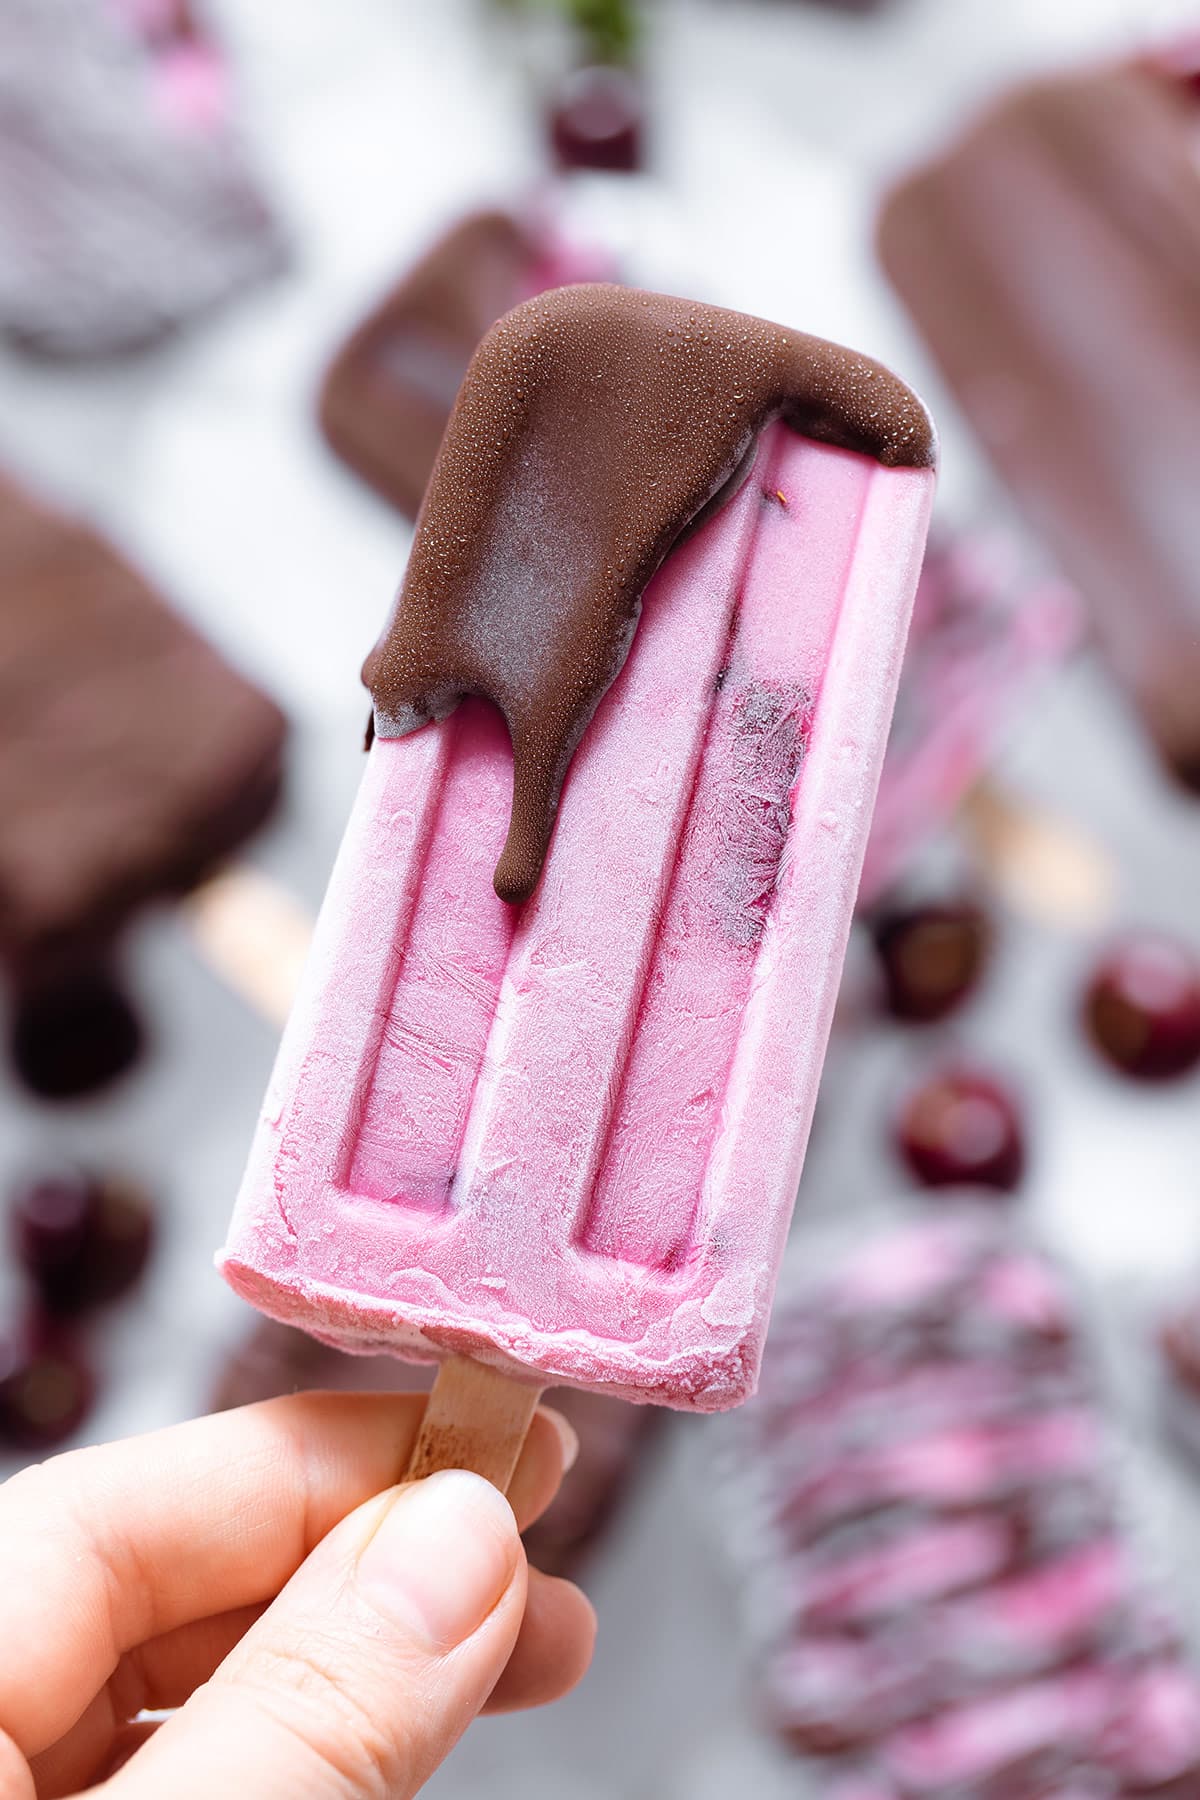 A hand holding a pink popsicle partially covered with chocolate at the tip.